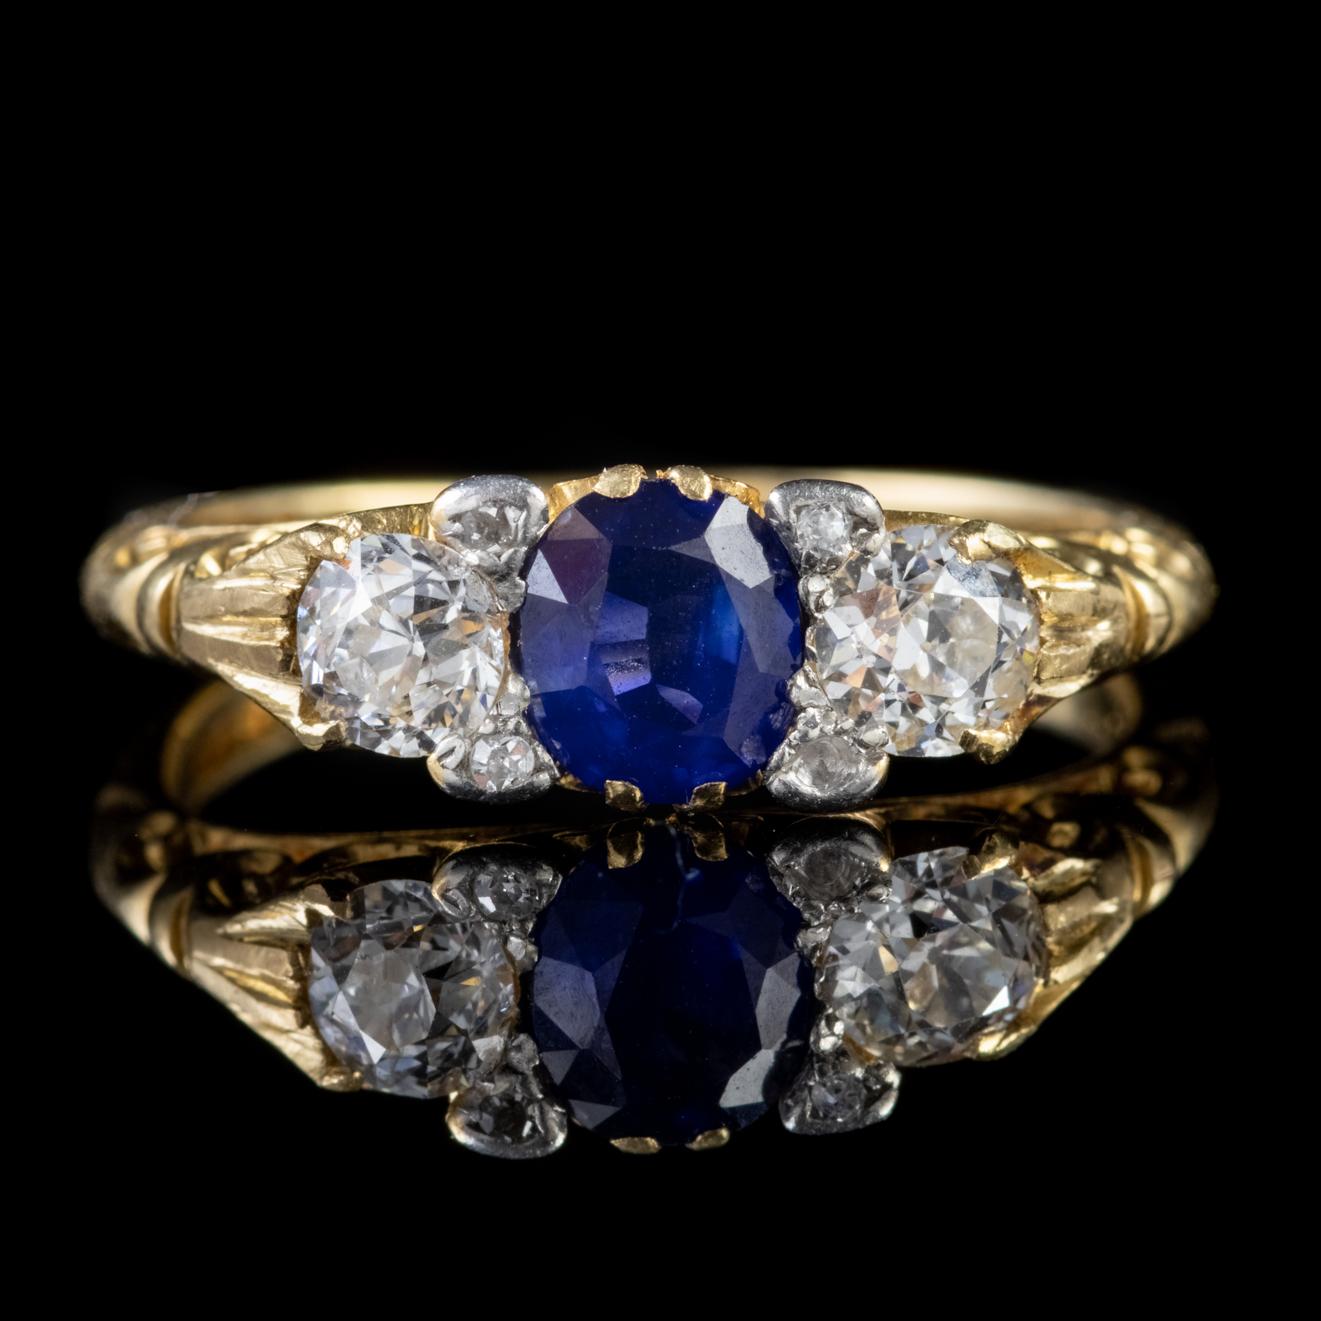 A stunning antique Victorian trilogy ring crowned with a central 0.80ct blue Sapphire flanked by two gorgeous 0.25ct Diamonds which are superb VS1 clarity – H colour stones accompanied by four smaller Diamonds that make a total of approx. 0.60ct.